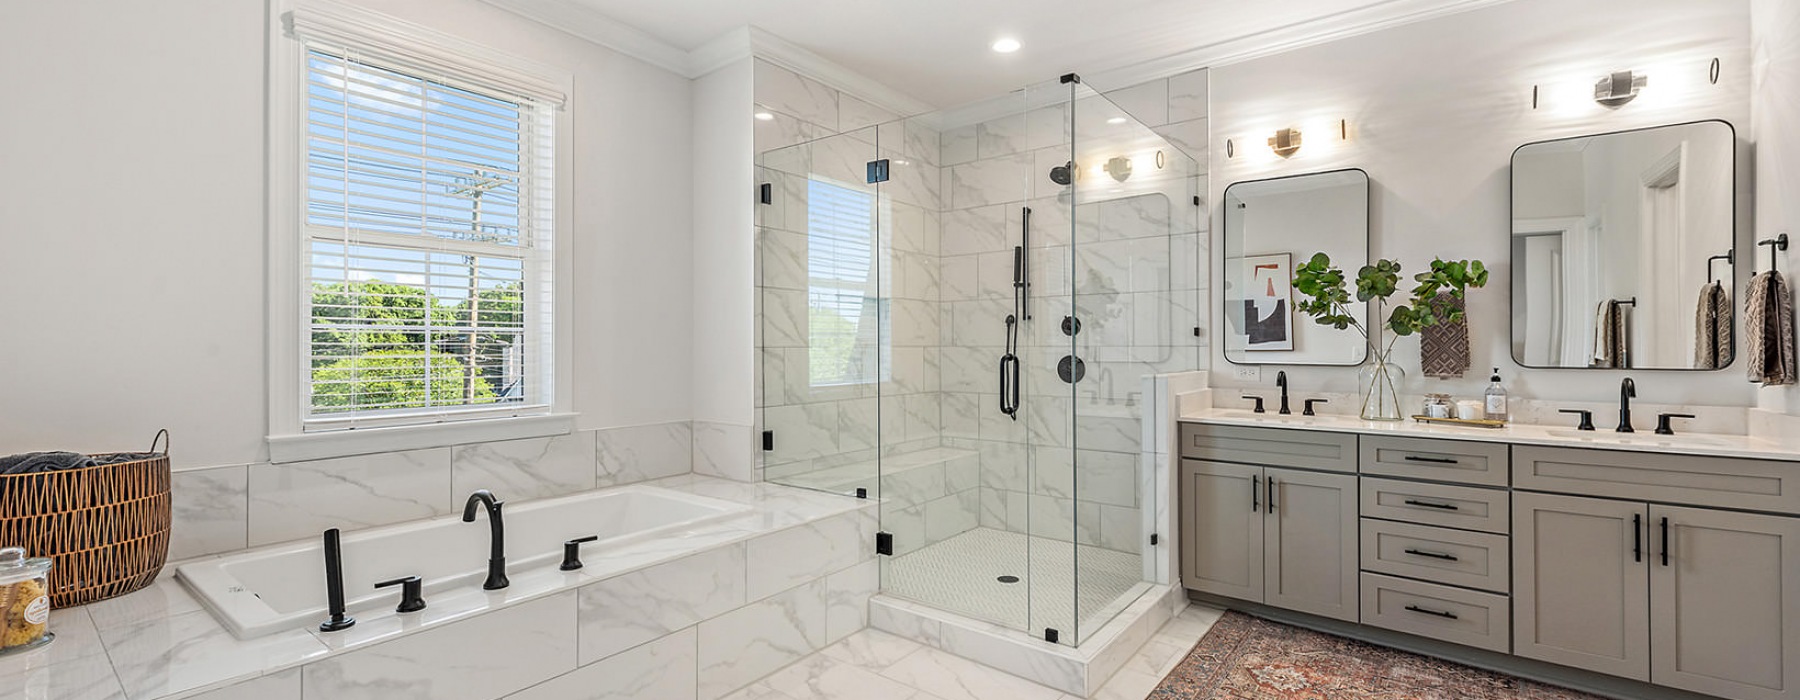 recessed lighting in large bathroom with soaking tub and separate walk-in shower